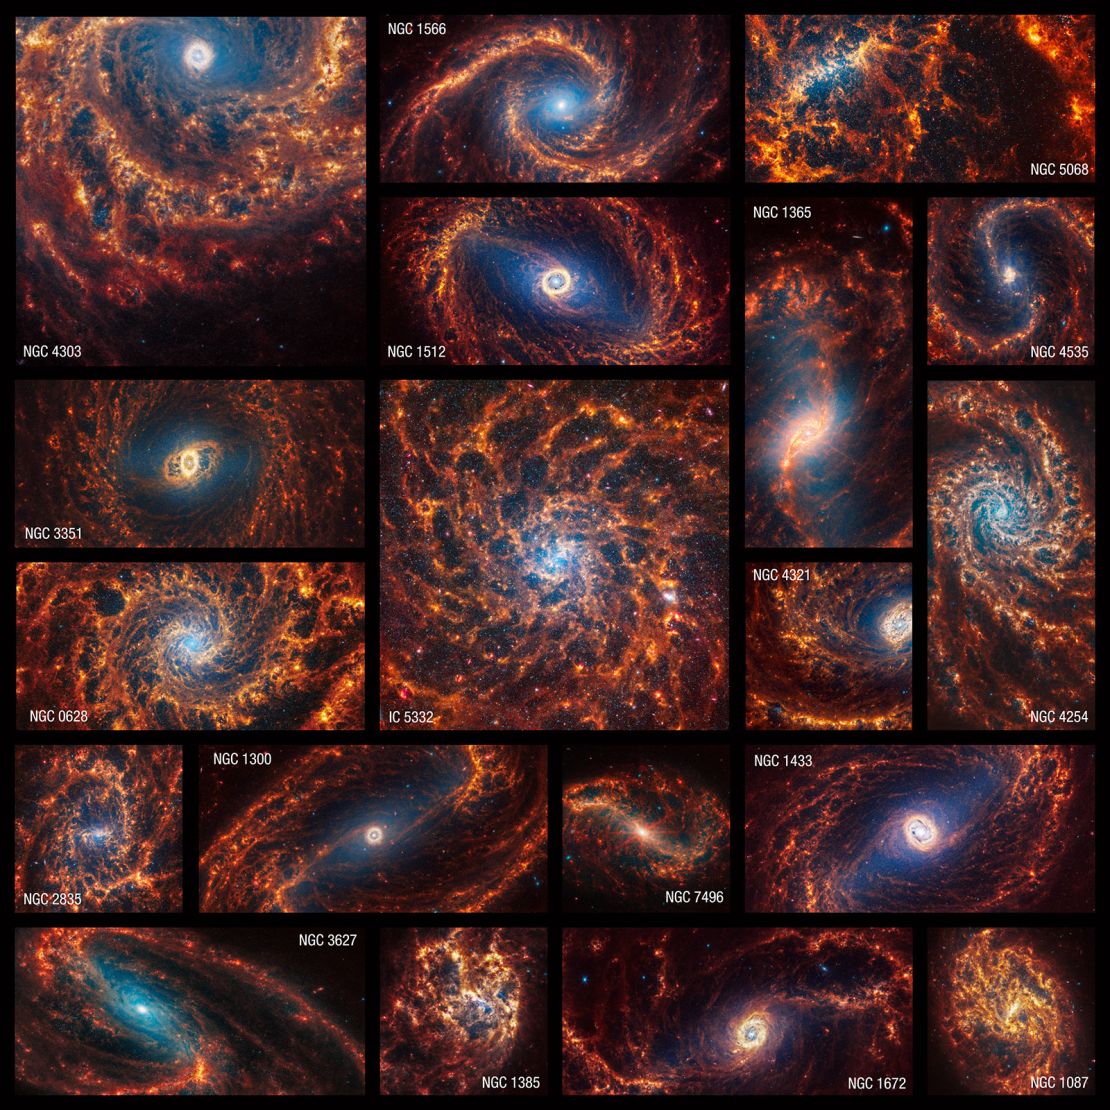 This collection of 19 face-on spiral galaxies from the James Webb Space Telescope in near- and mid-infrared light is at once overwhelming and awe-inspiring.